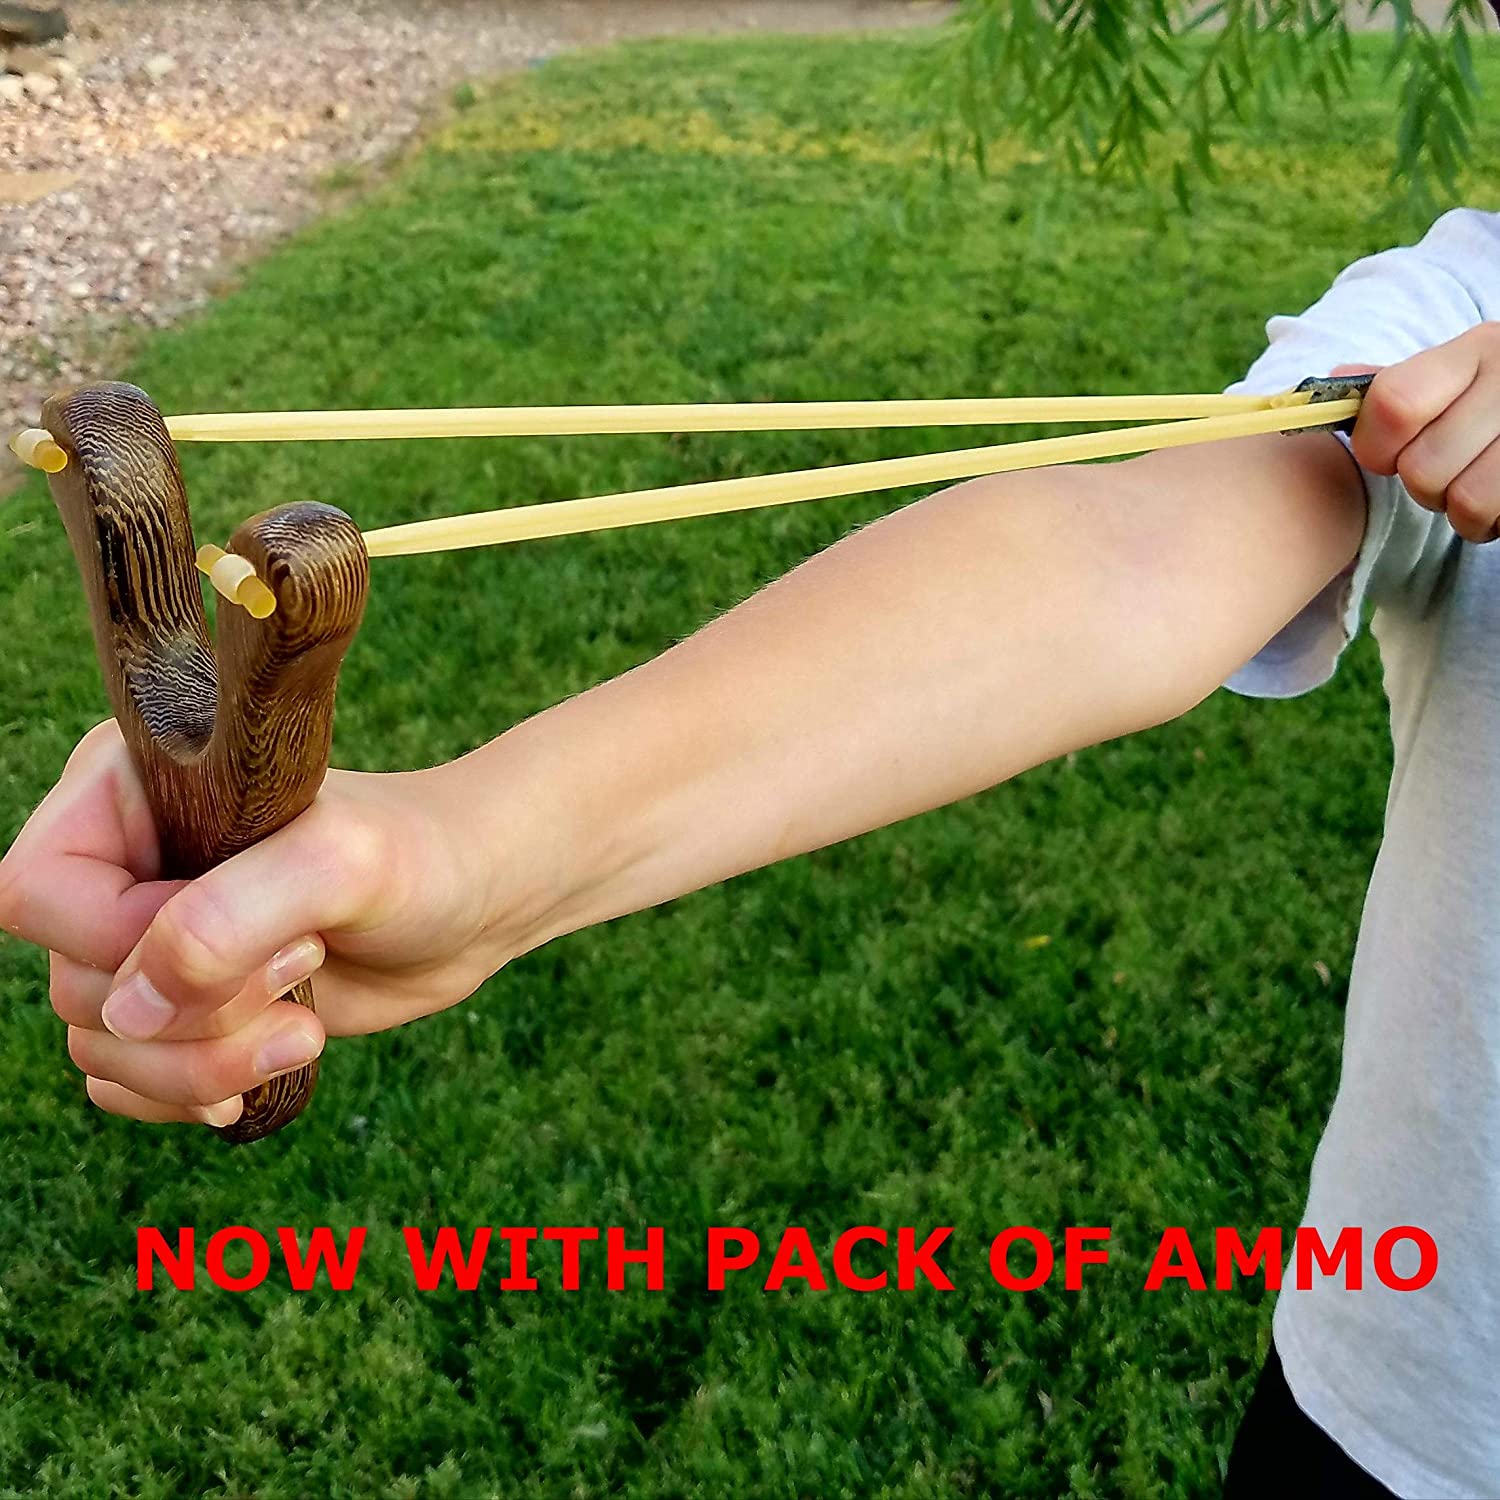 Handcarved Wooden Toy Launchers 3-Pack With Ammo